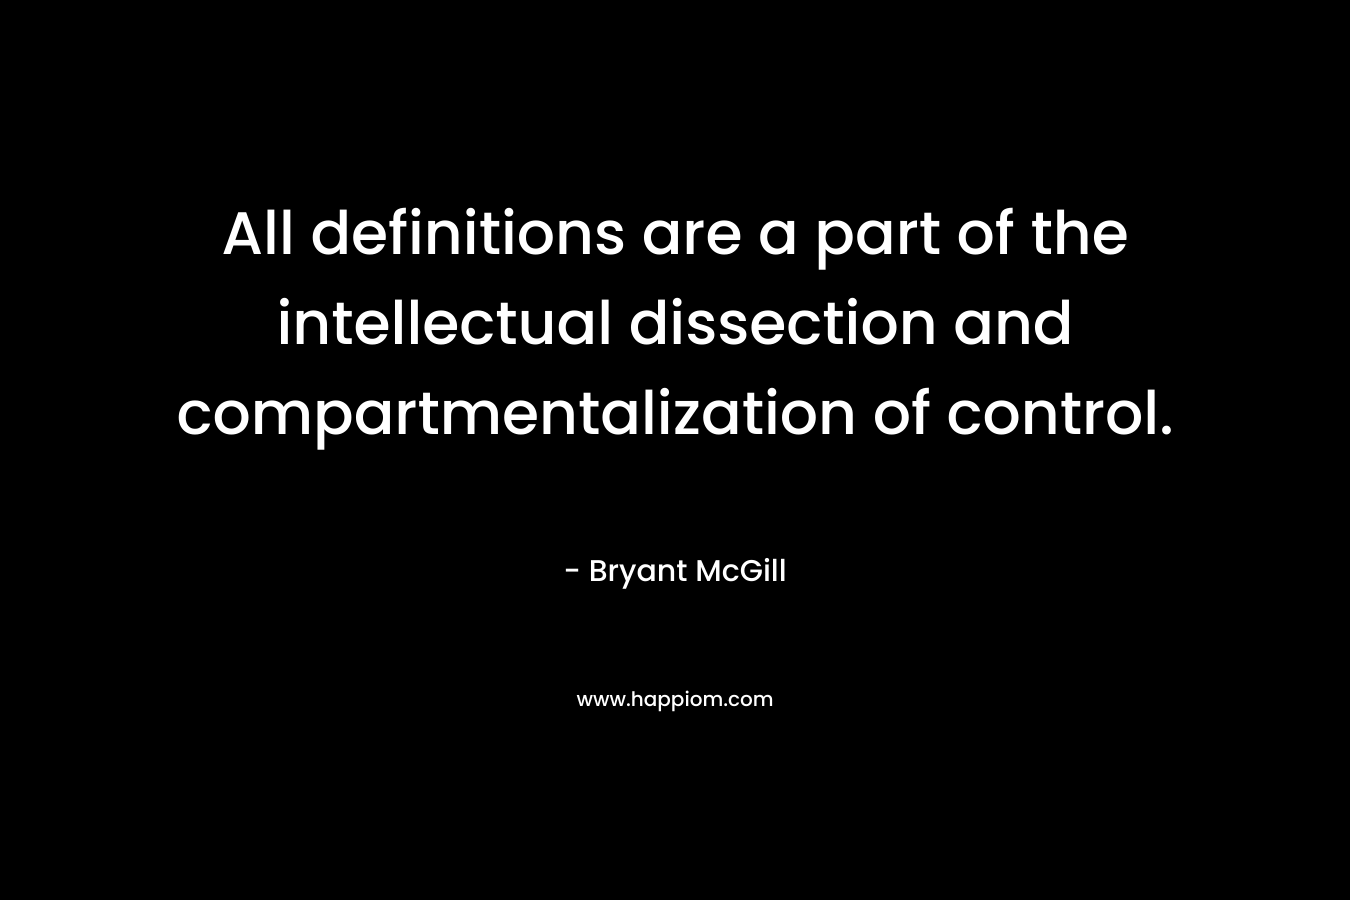 All definitions are a part of the intellectual dissection and compartmentalization of control. – Bryant McGill